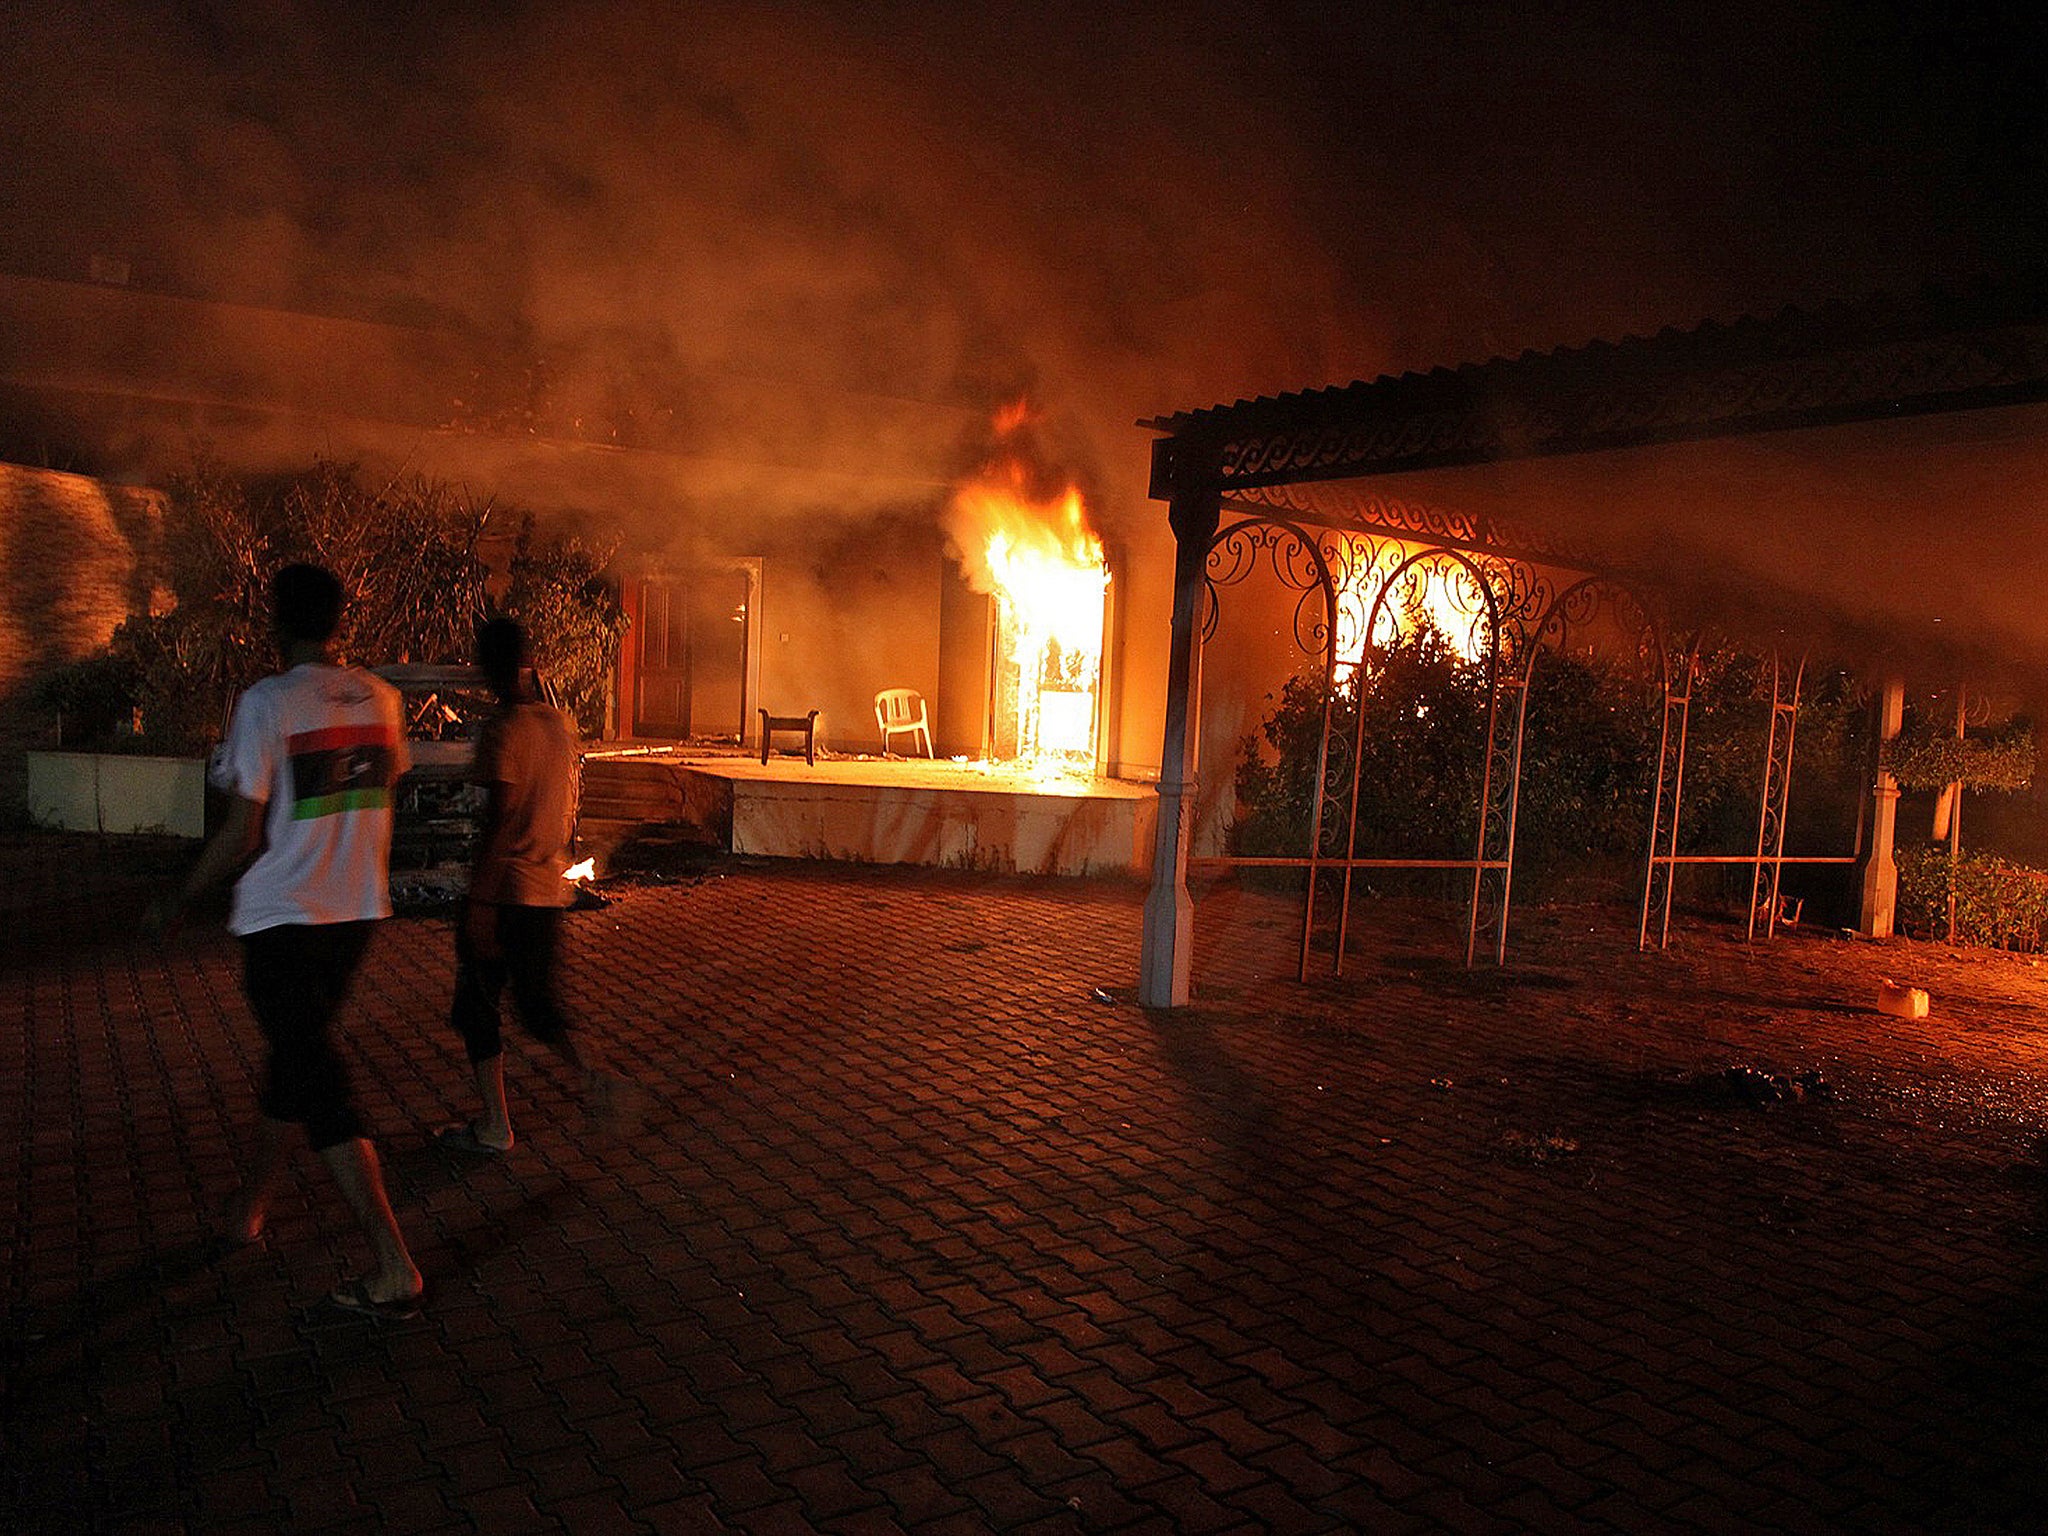 The US consulate in Benghazi was attacked on September 11, 2012, setting fire to the building and killing four Americans